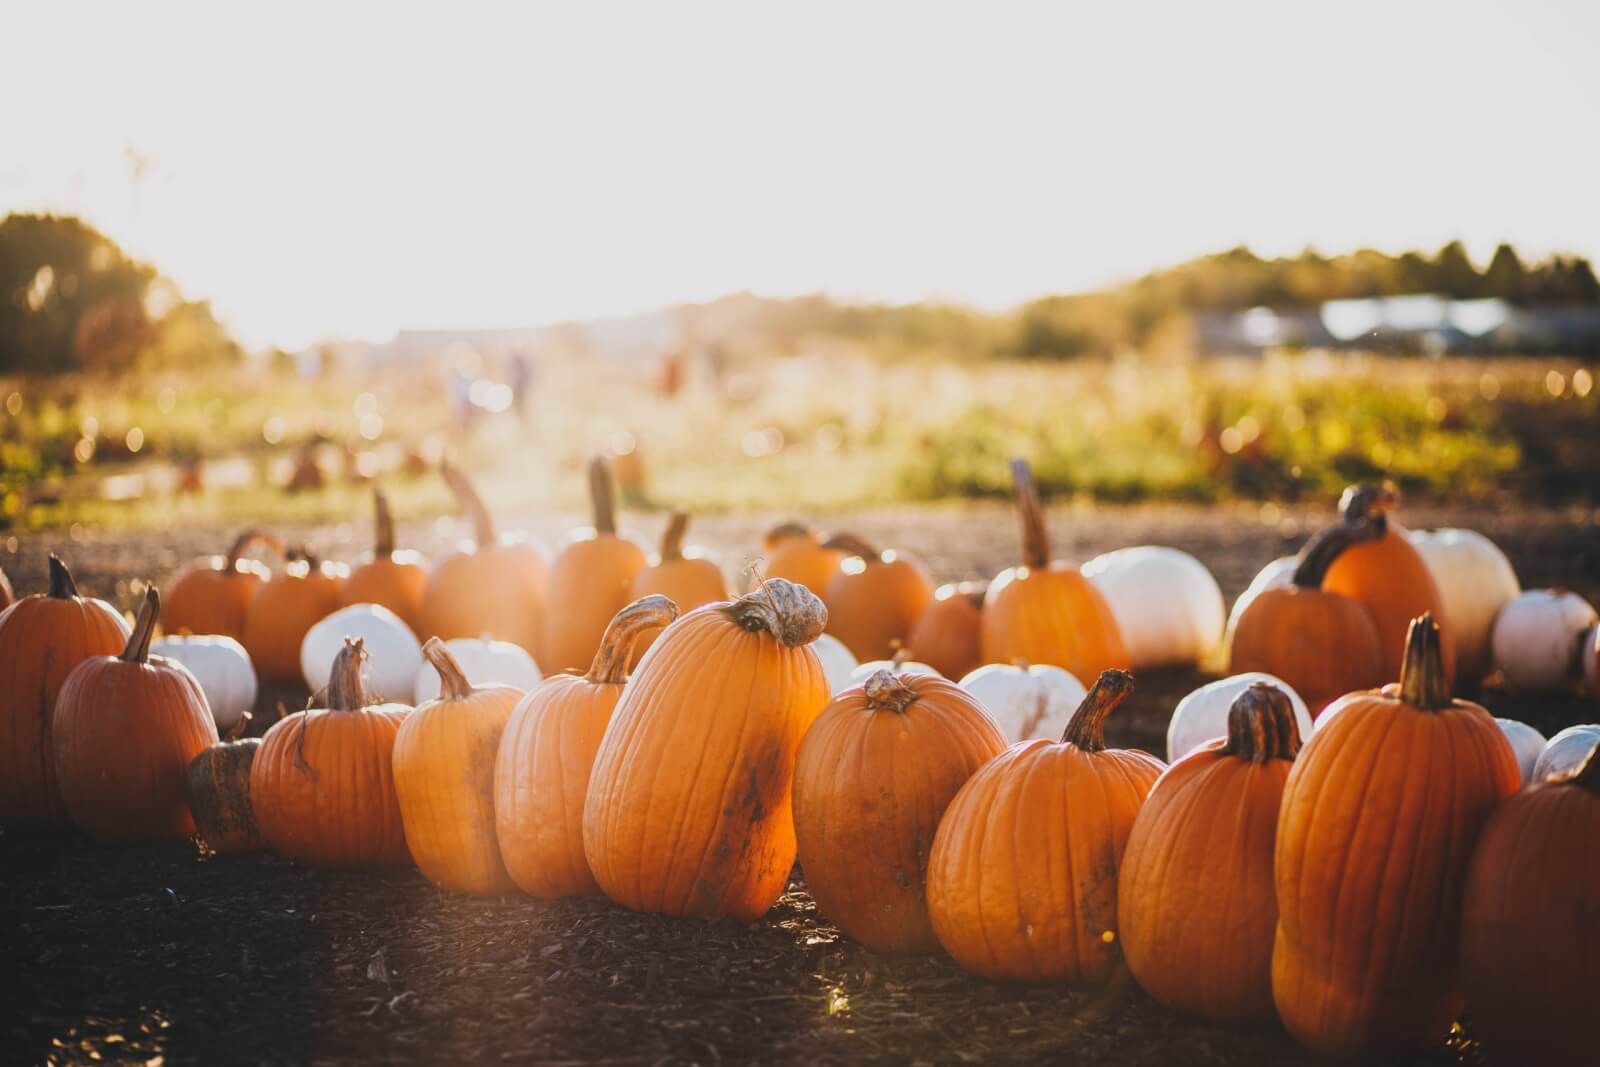 A line of orange and white pumpkins with the sun shining behind them